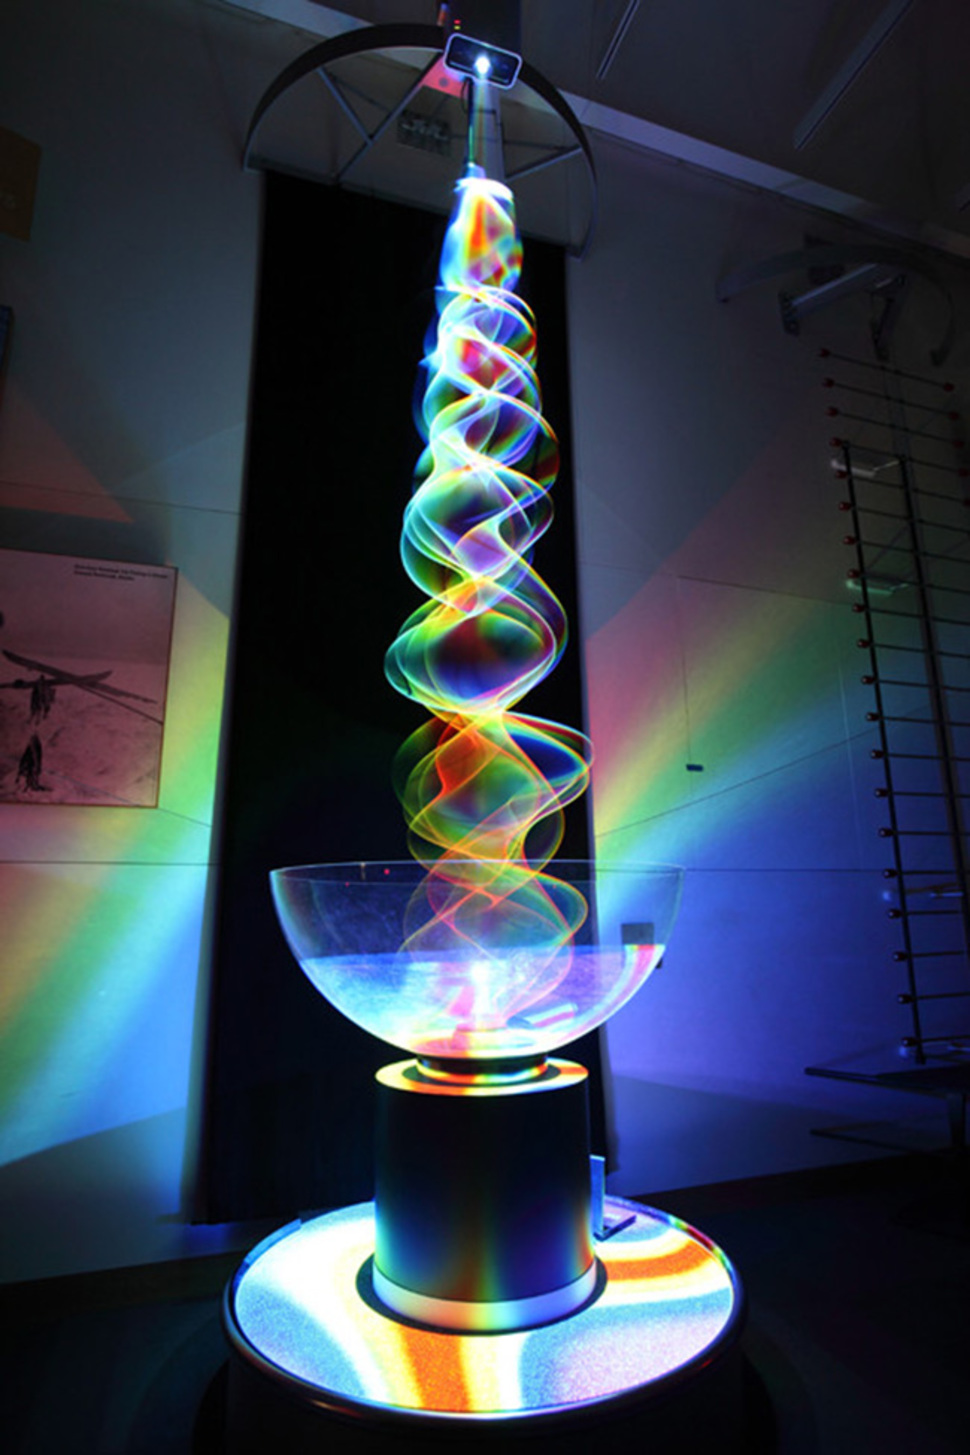 The most creative and witty sculptures from around the globe - Kinetic Light Sculpture by Paul Friedlander